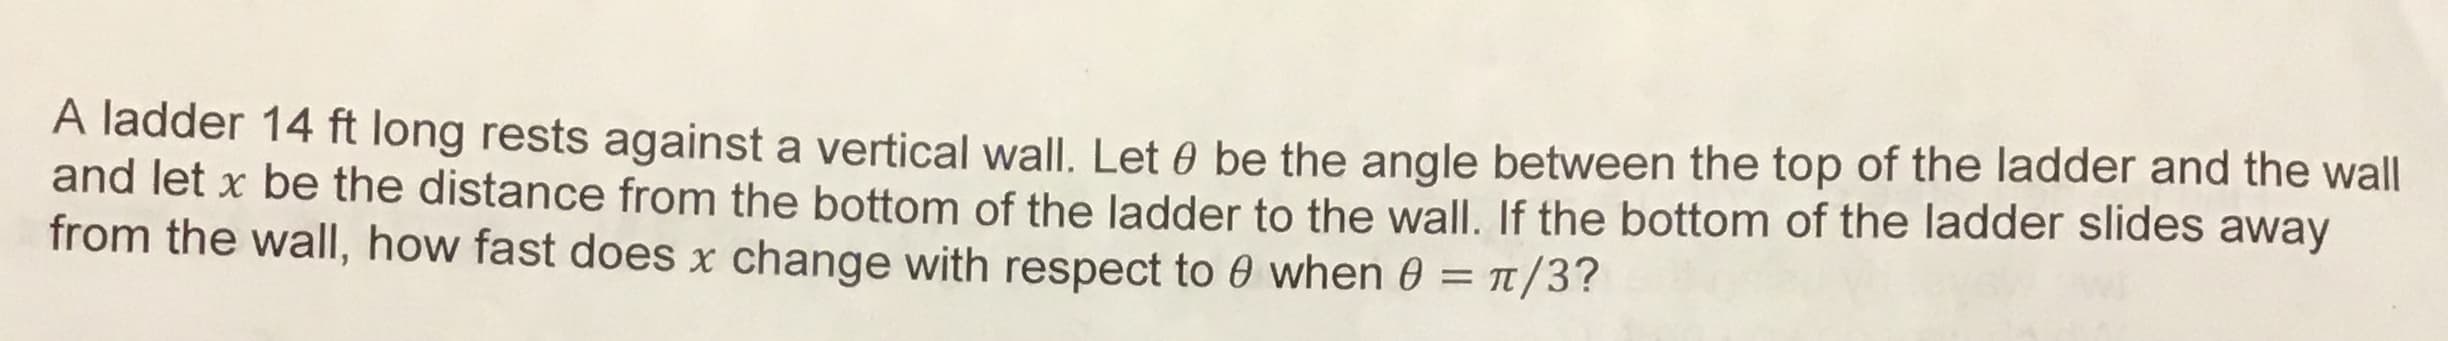 A ladder 14 ft long rests against a vertical wall. Let 0 be the angle between the top of the ladder and the wall
and let x be the distance from the bottom of the ladder to the wall. If the bottom of the ladder slides away
from the wall, how fast does x change with respect to 0 when 0 /3?
